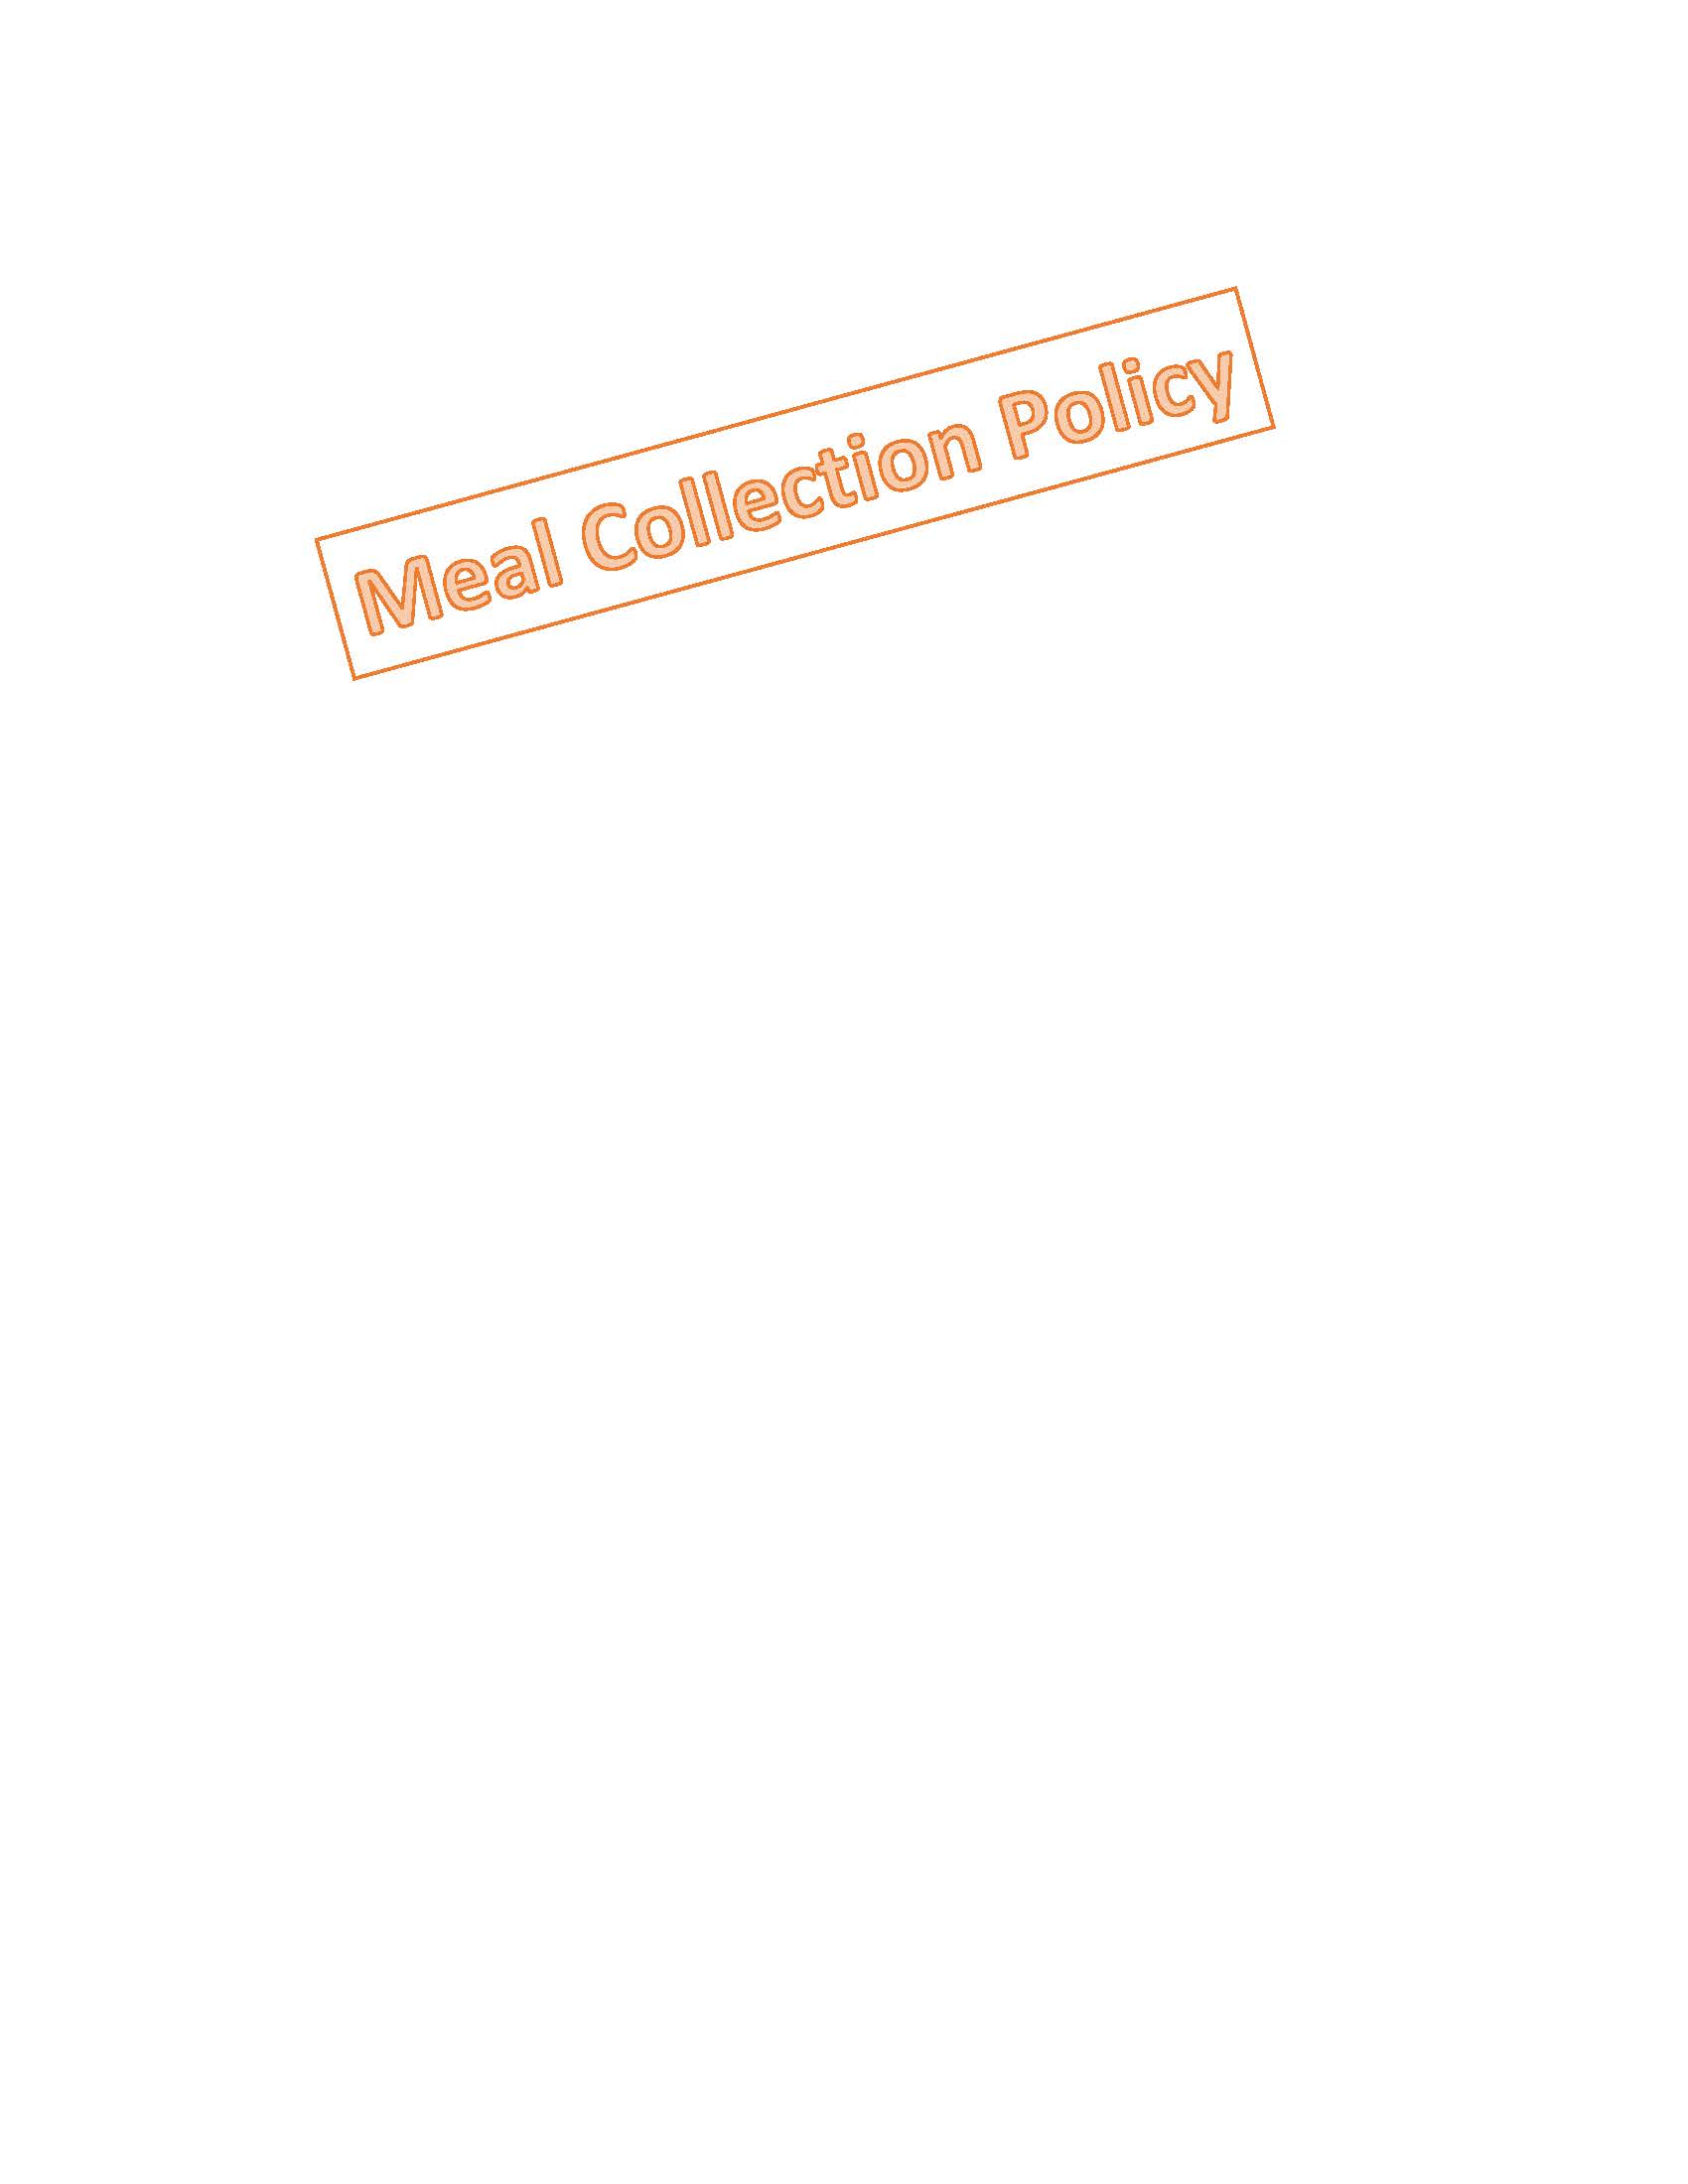 23-24 Meal Collection Policy.jpg